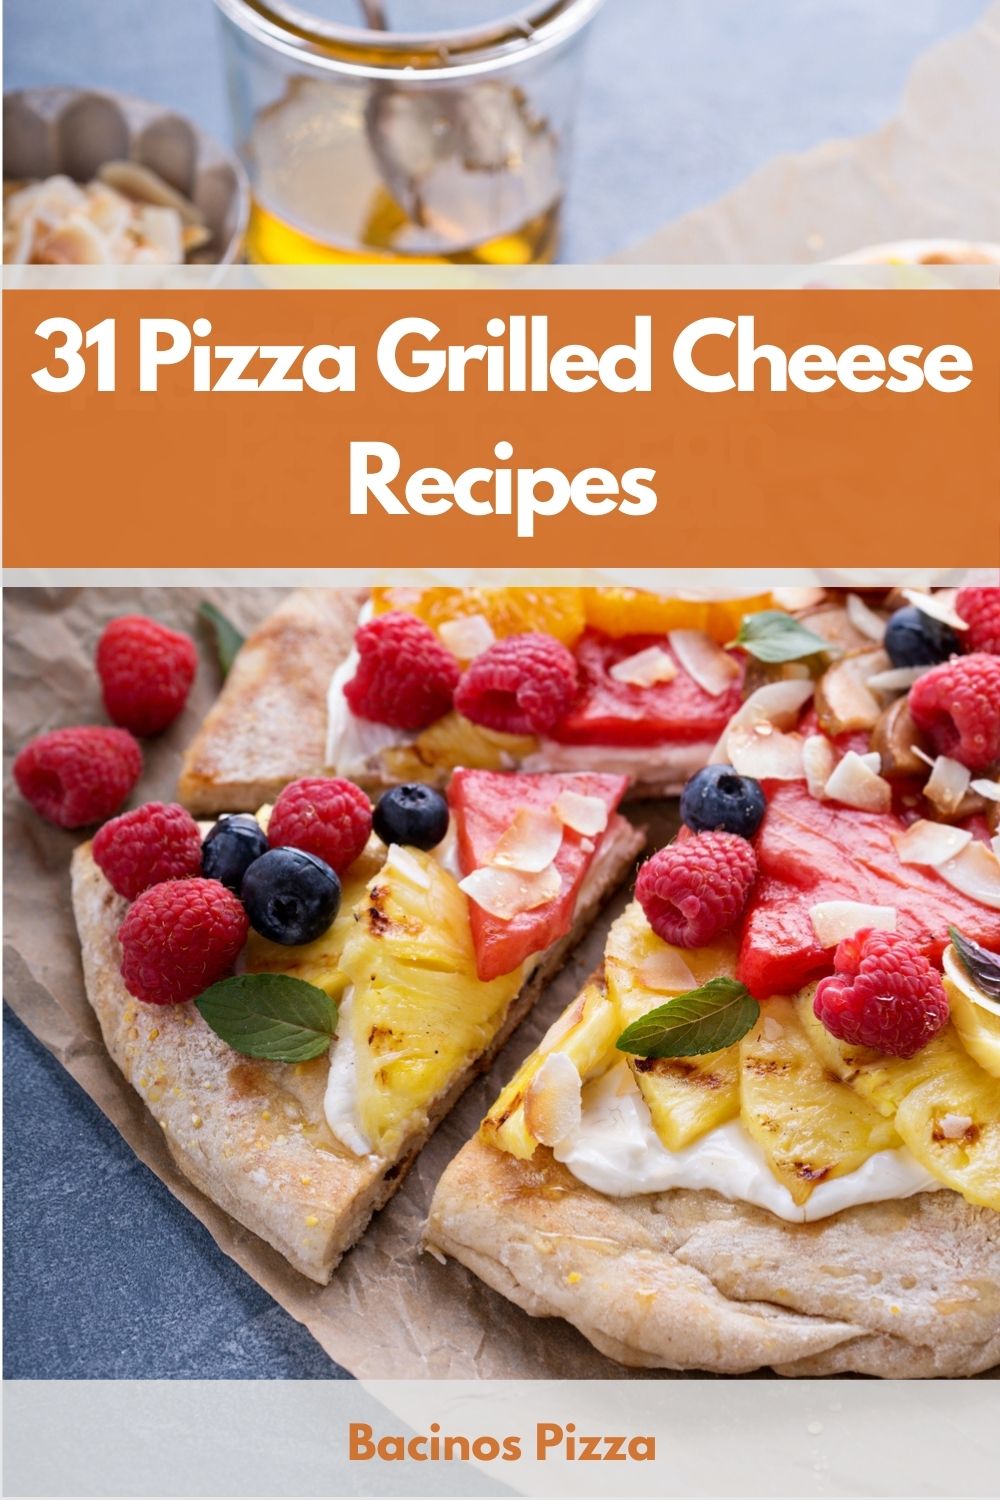 31 Pizza Grilled Cheese Recipes pin